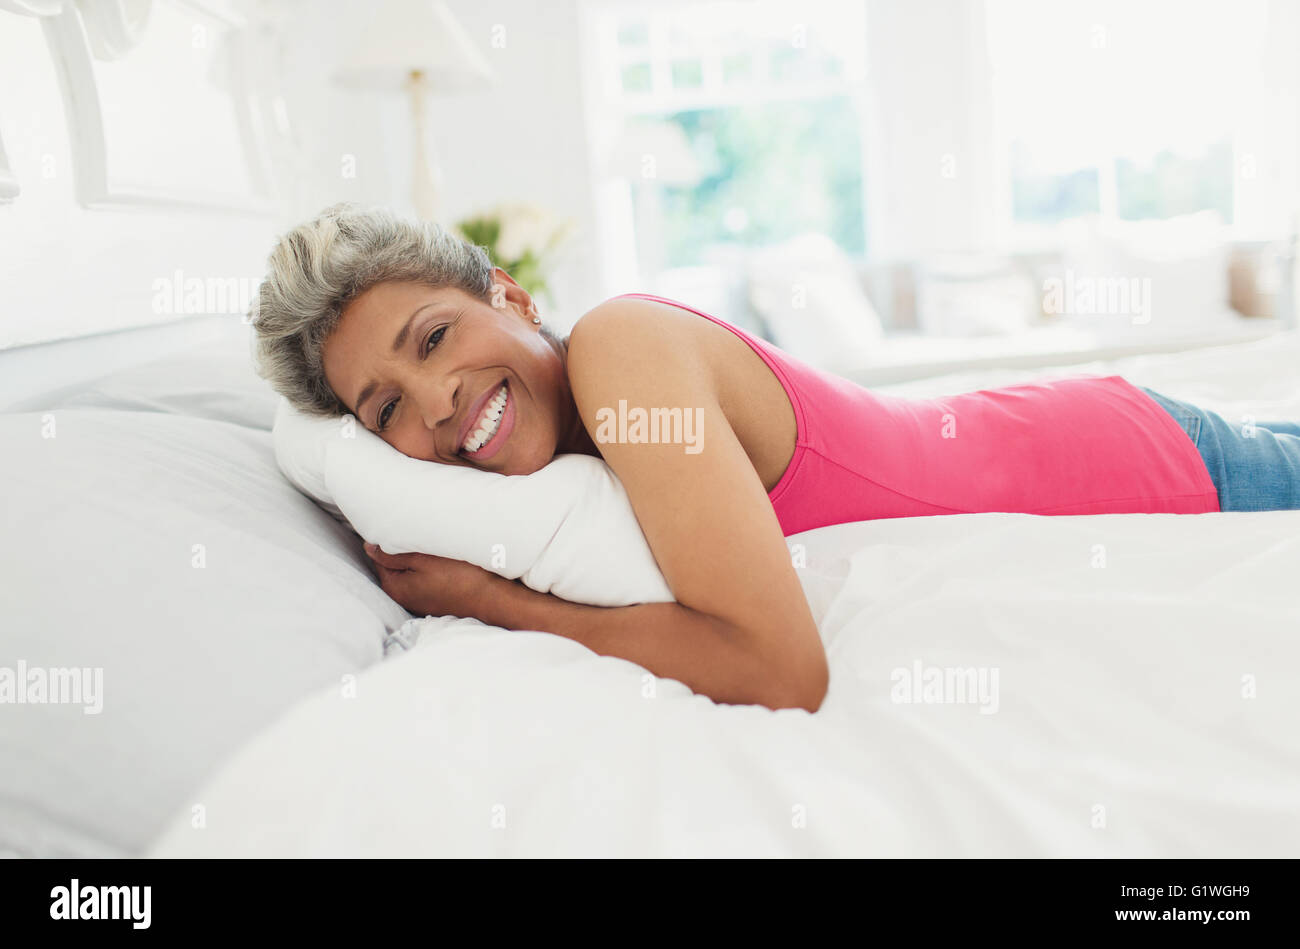 Portrait of smiling mature woman laying on bed Banque D'Images